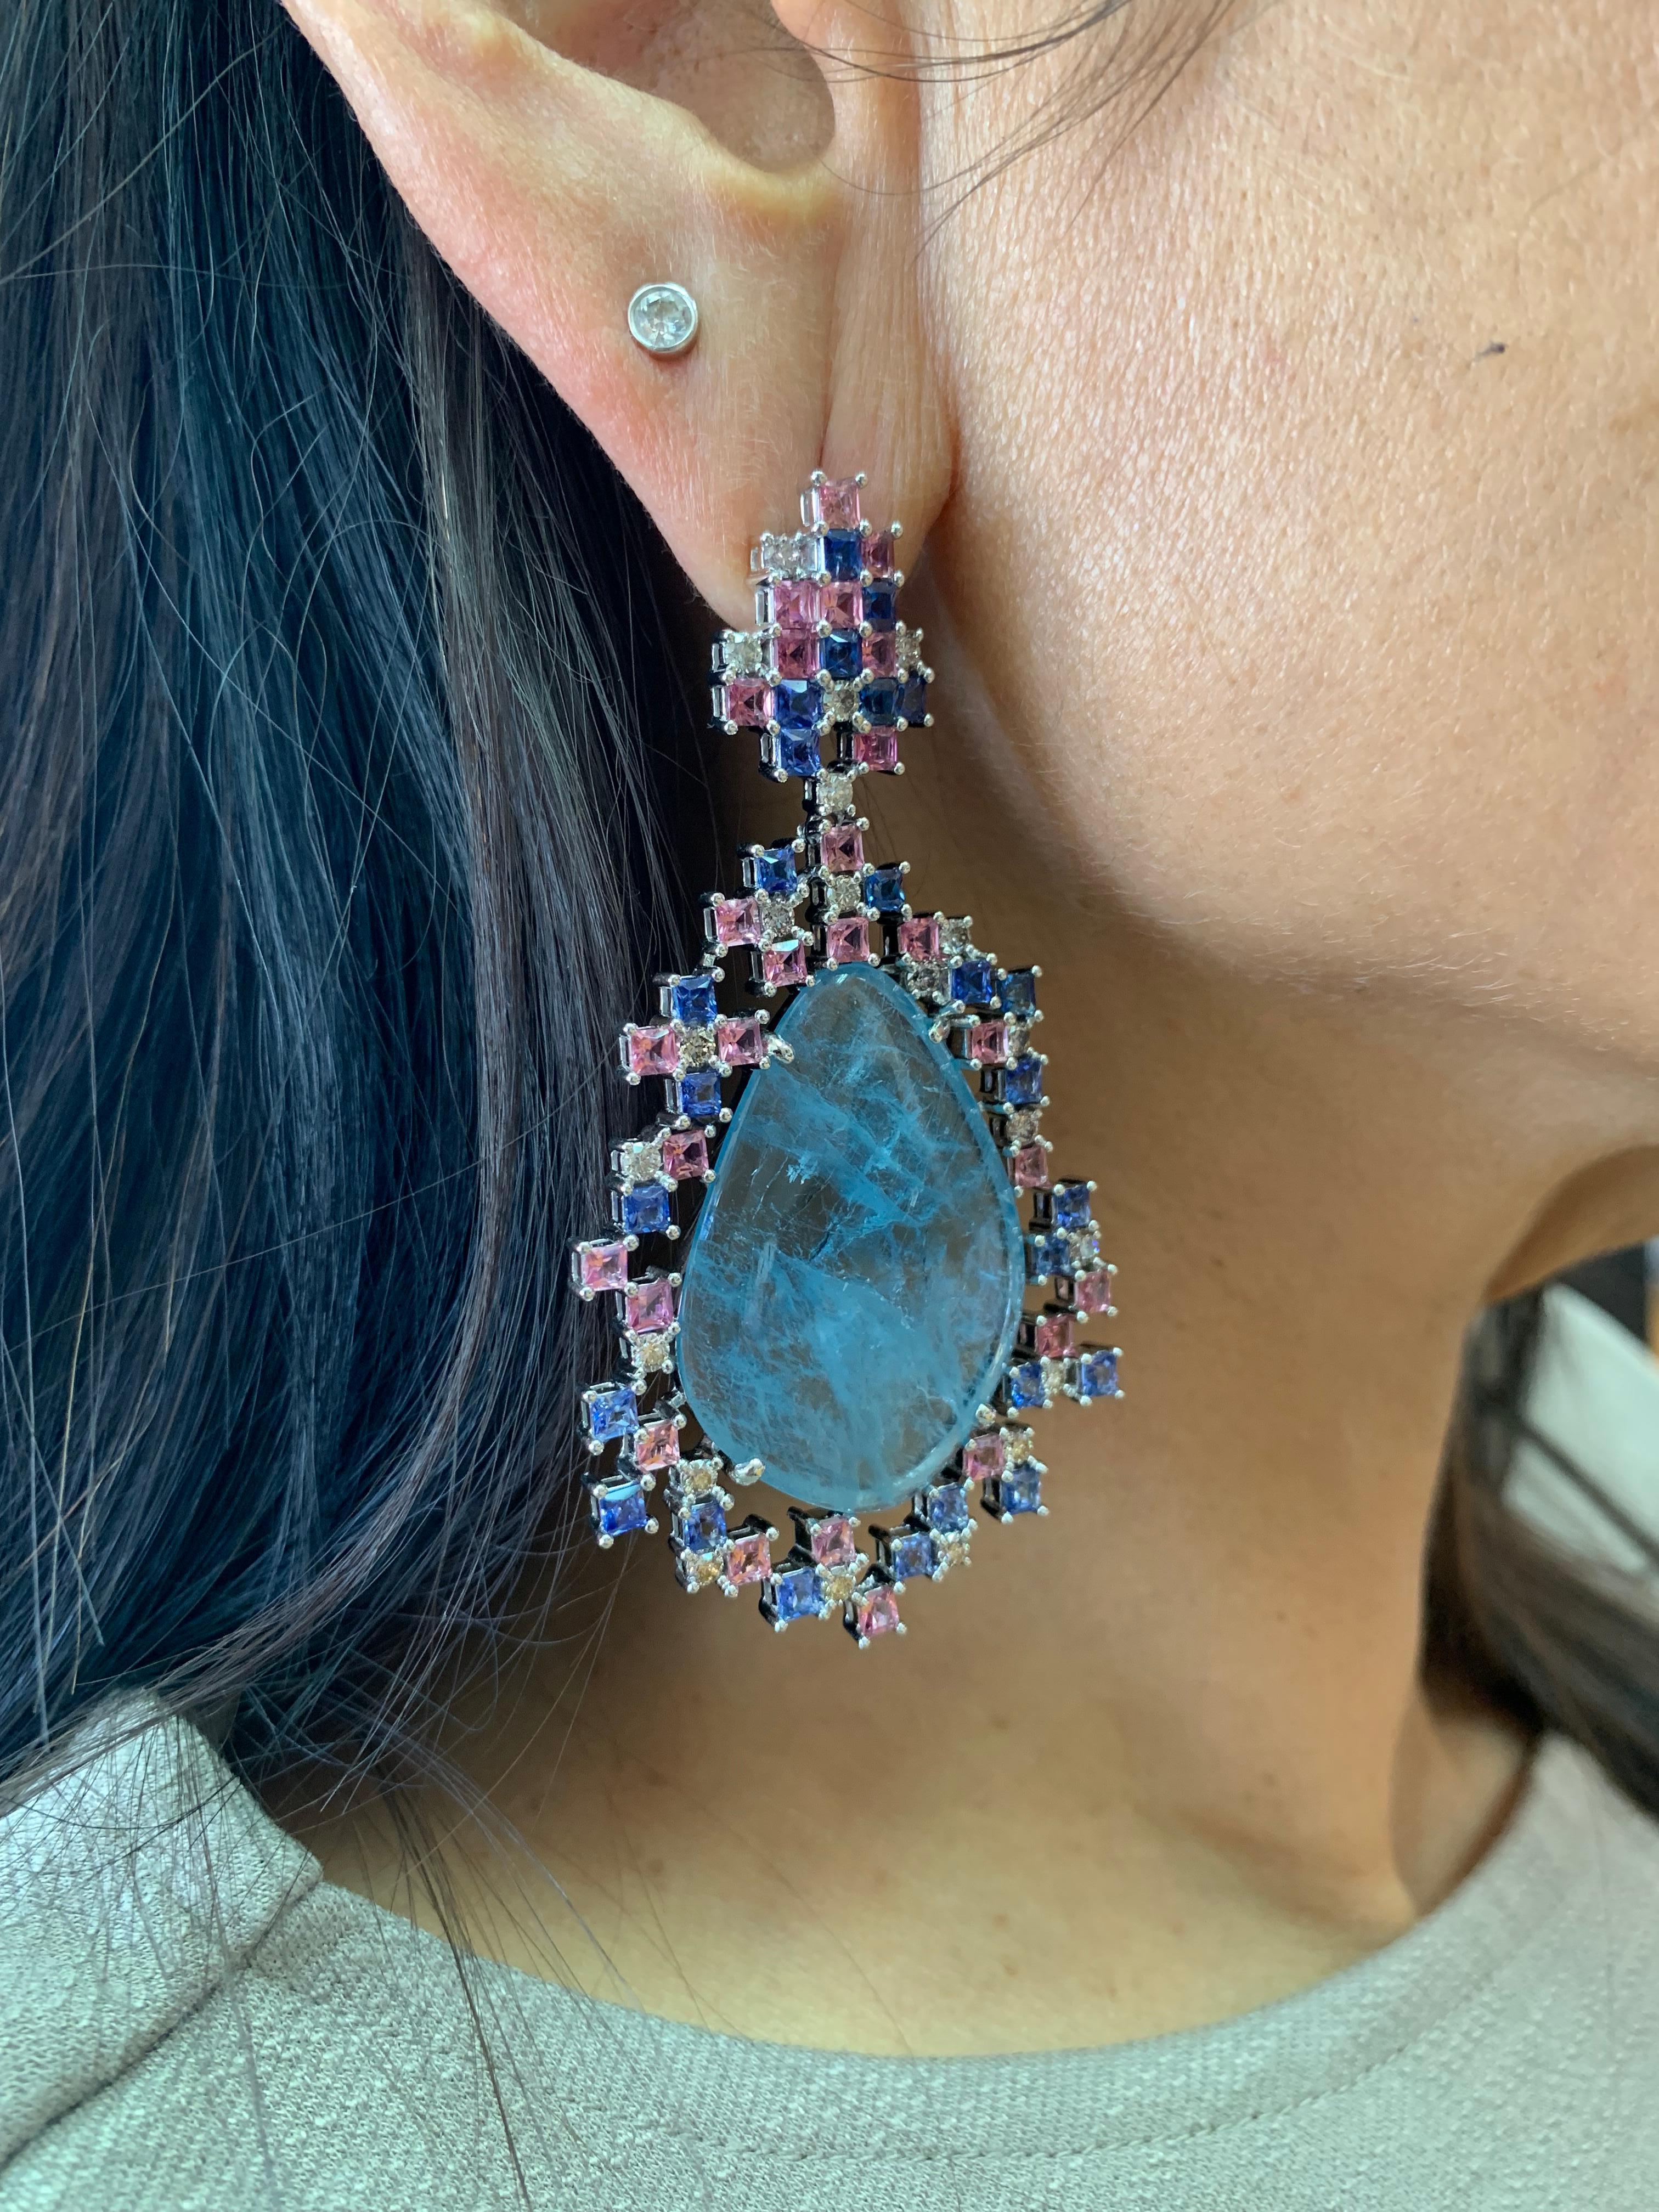 This is unique one-of-one earring incorporating sliced aquamarines with a pixelated design using pink tourmaline and blue sapphire. 

Sliced Aquamarine Earrings with Gemstone & Diamond in 18 Karat White Gold

Aquamarine: 37.28 carats, fancy sliced